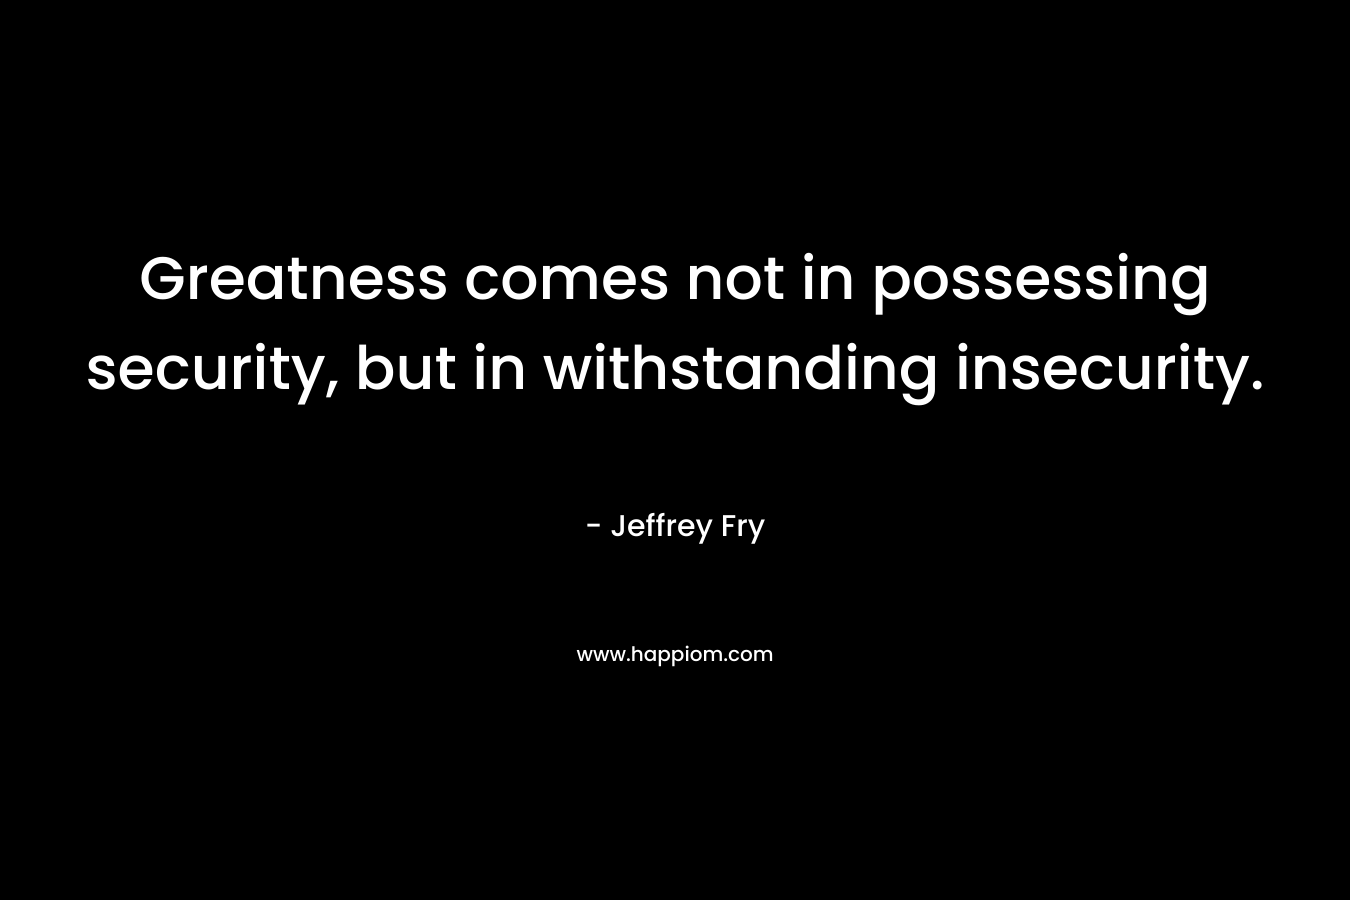 Greatness comes not in possessing security, but in withstanding insecurity.